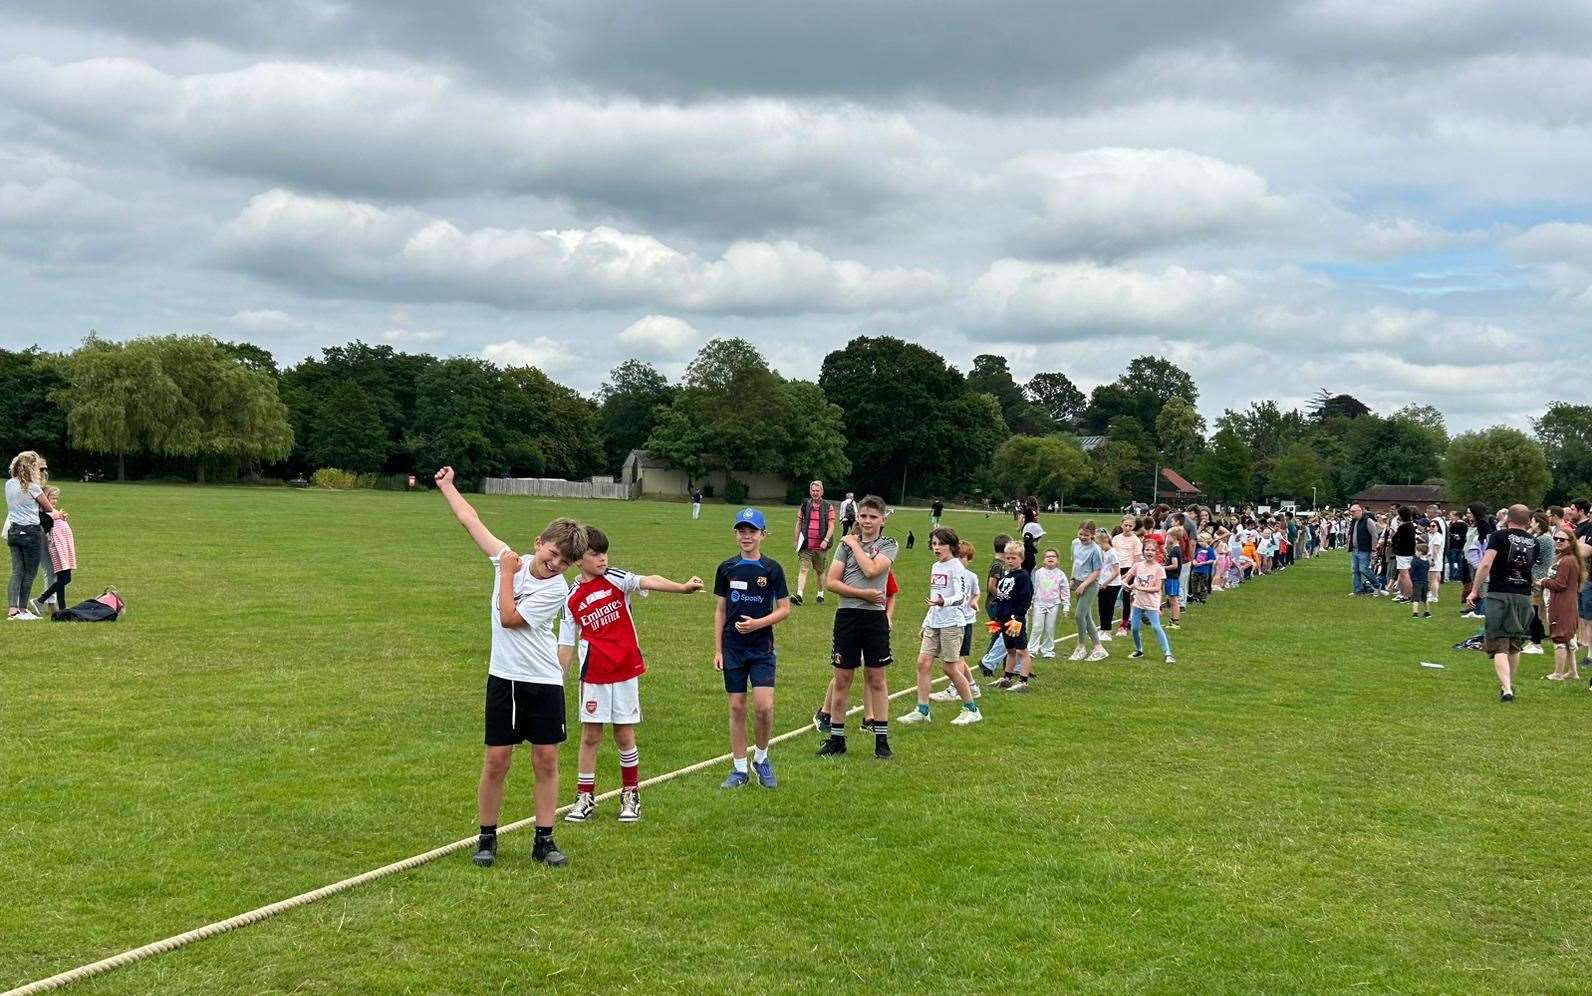 Limbering up for the challenge at the Tonbridge Tug of War